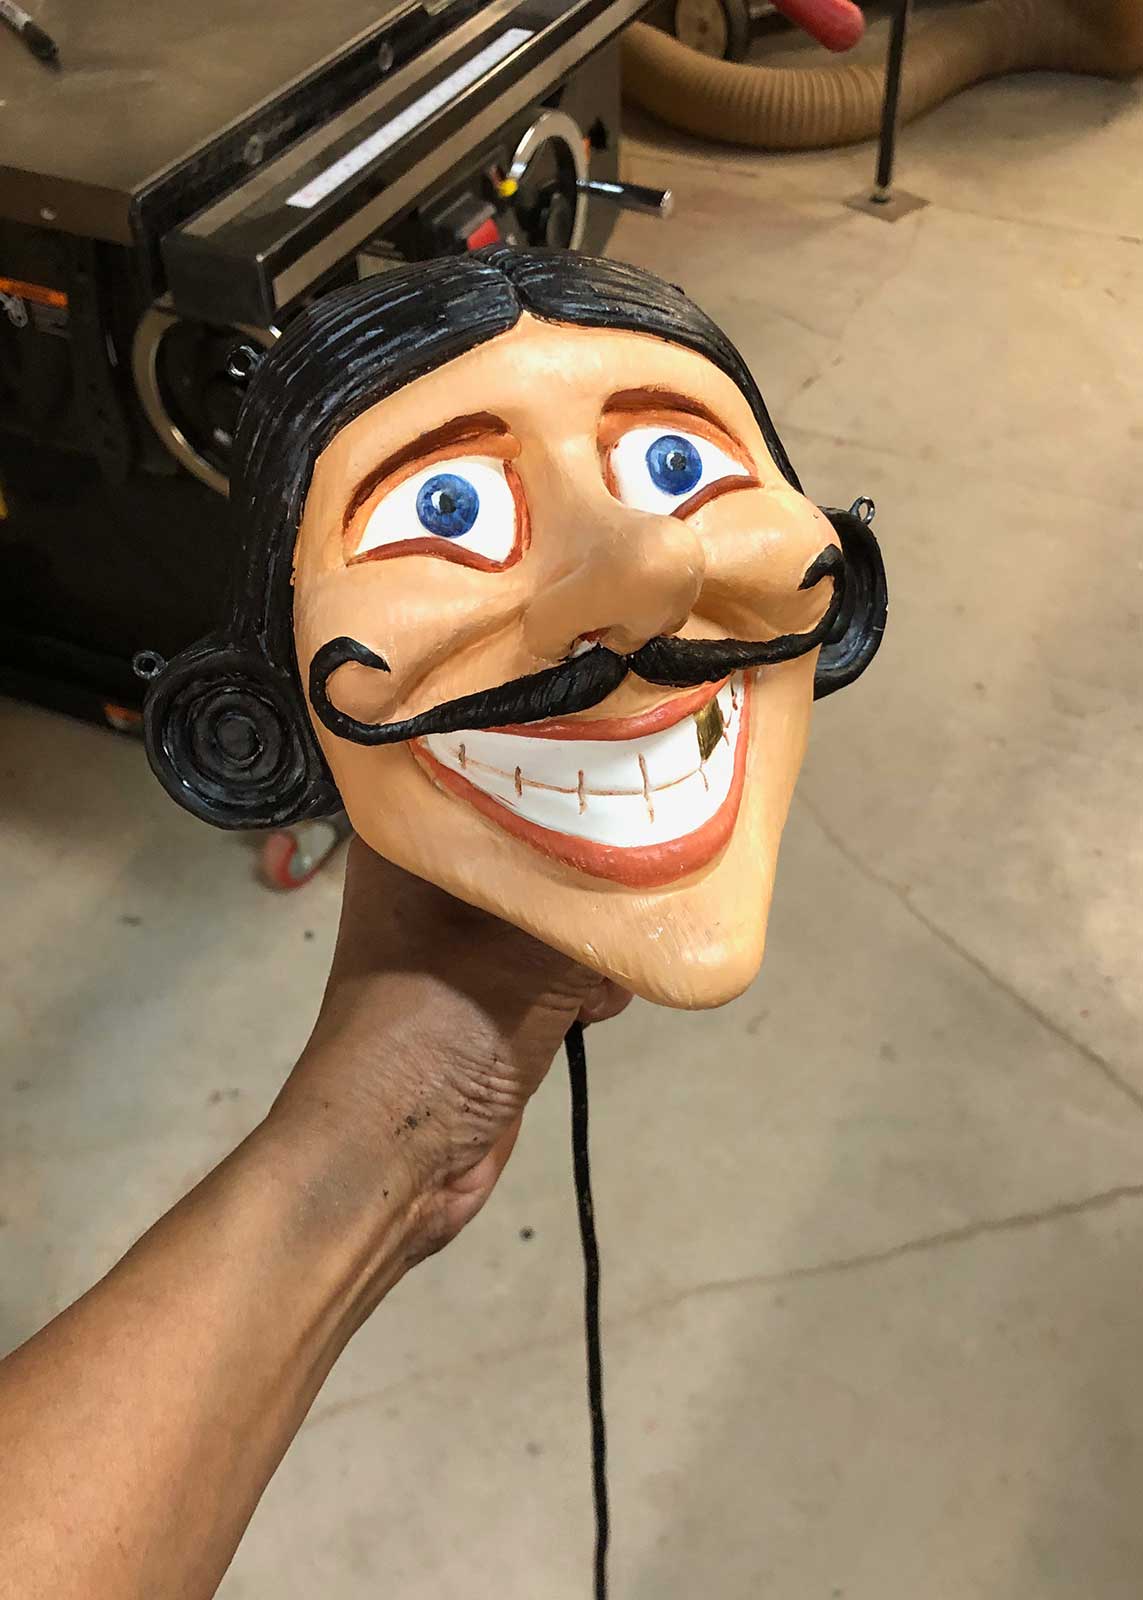 Our Magician Marionette's finished head